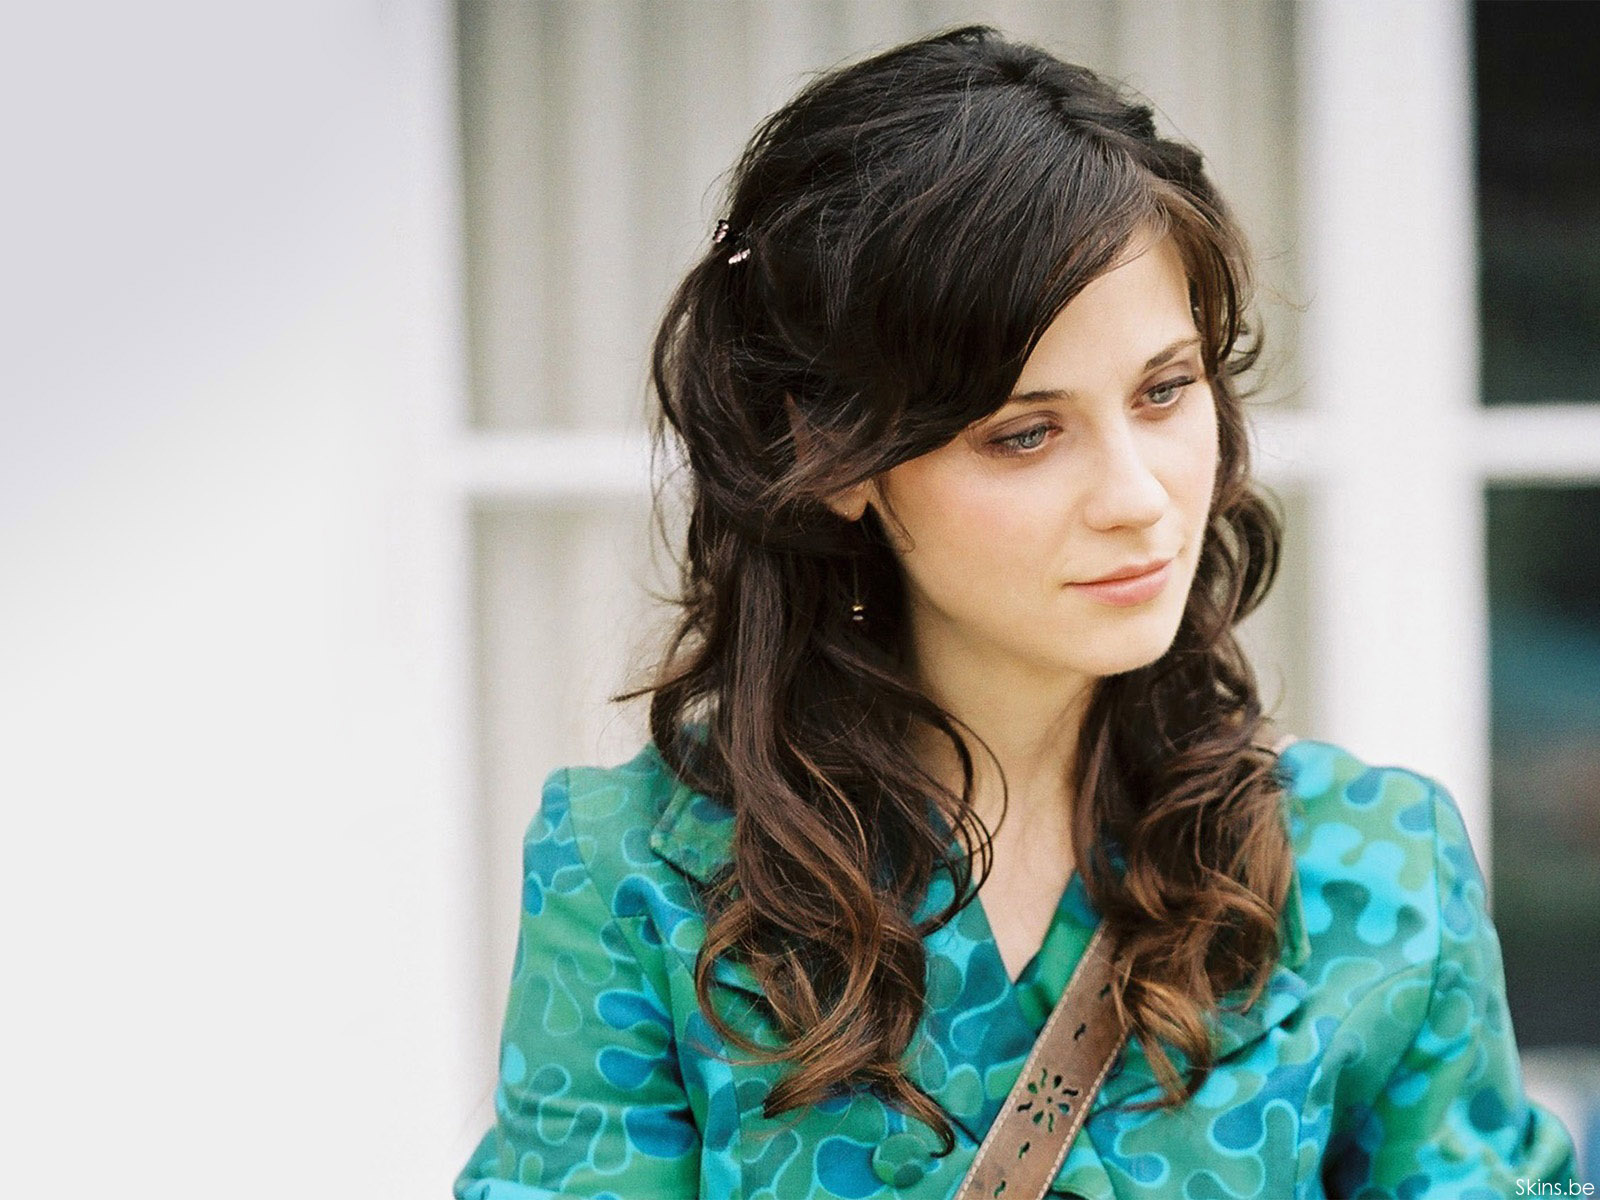 gorgeous actress zooey claire deschanel sing a song image